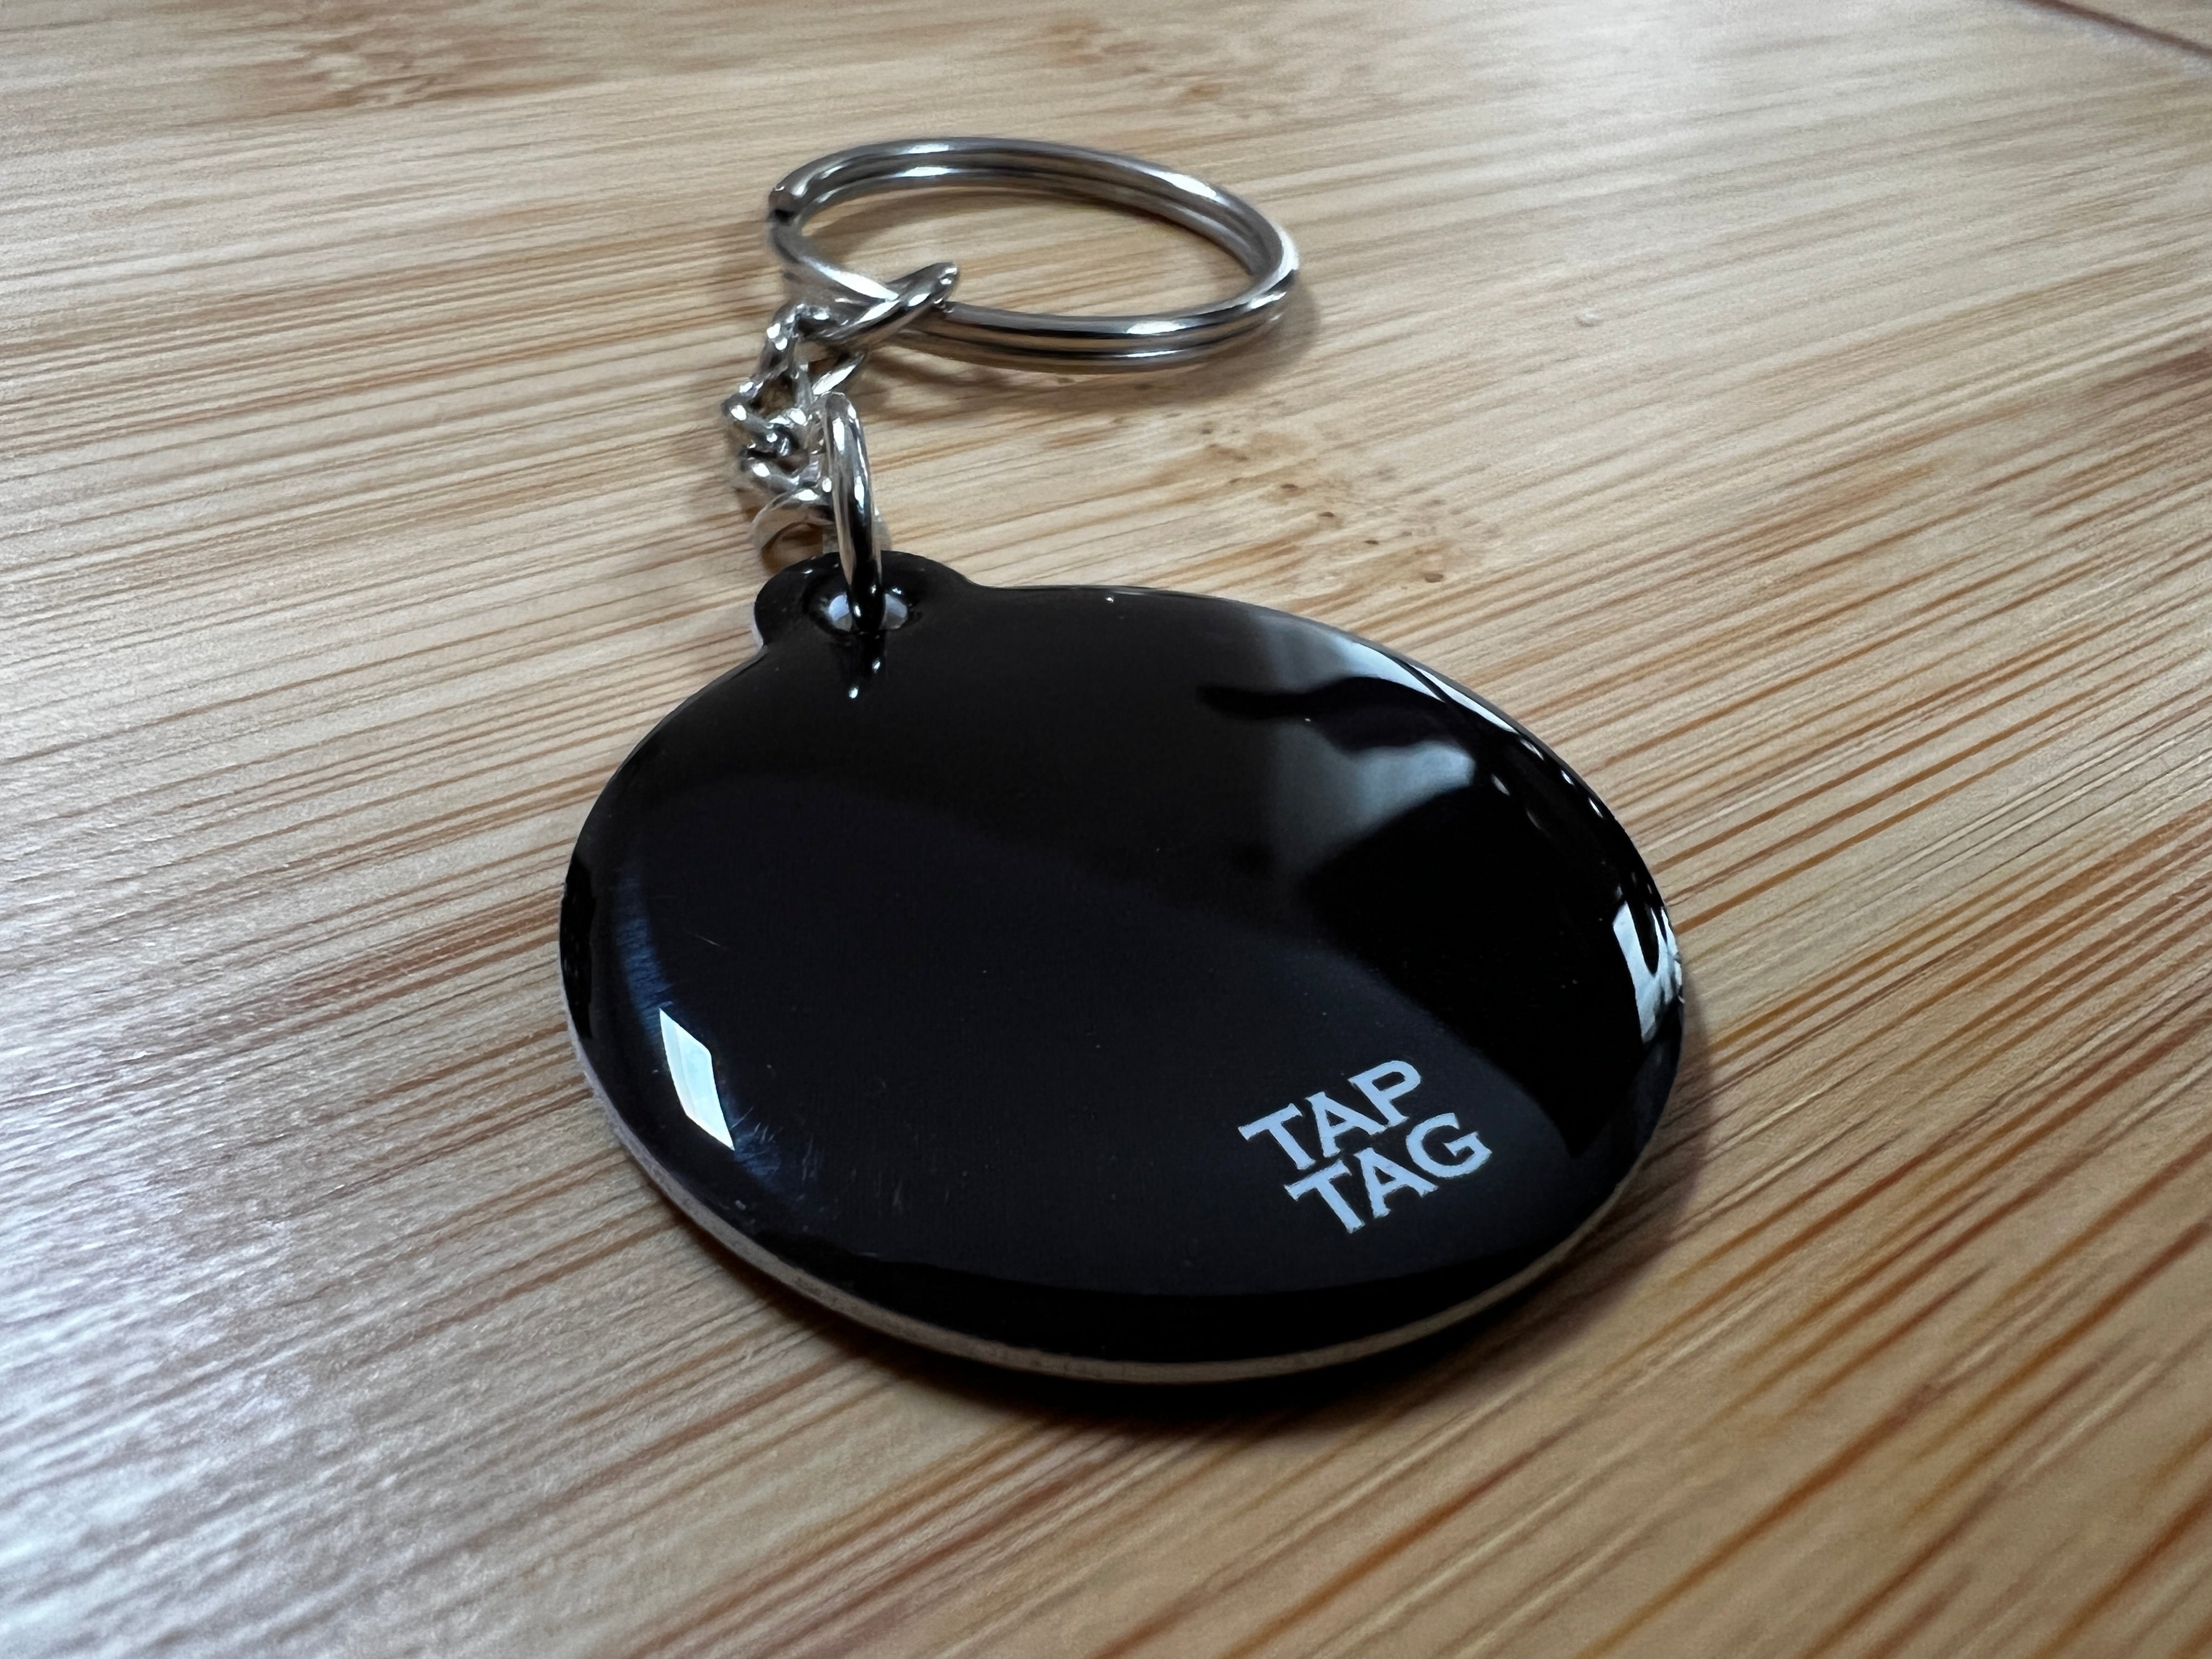 How to Password Protect NFC Tags